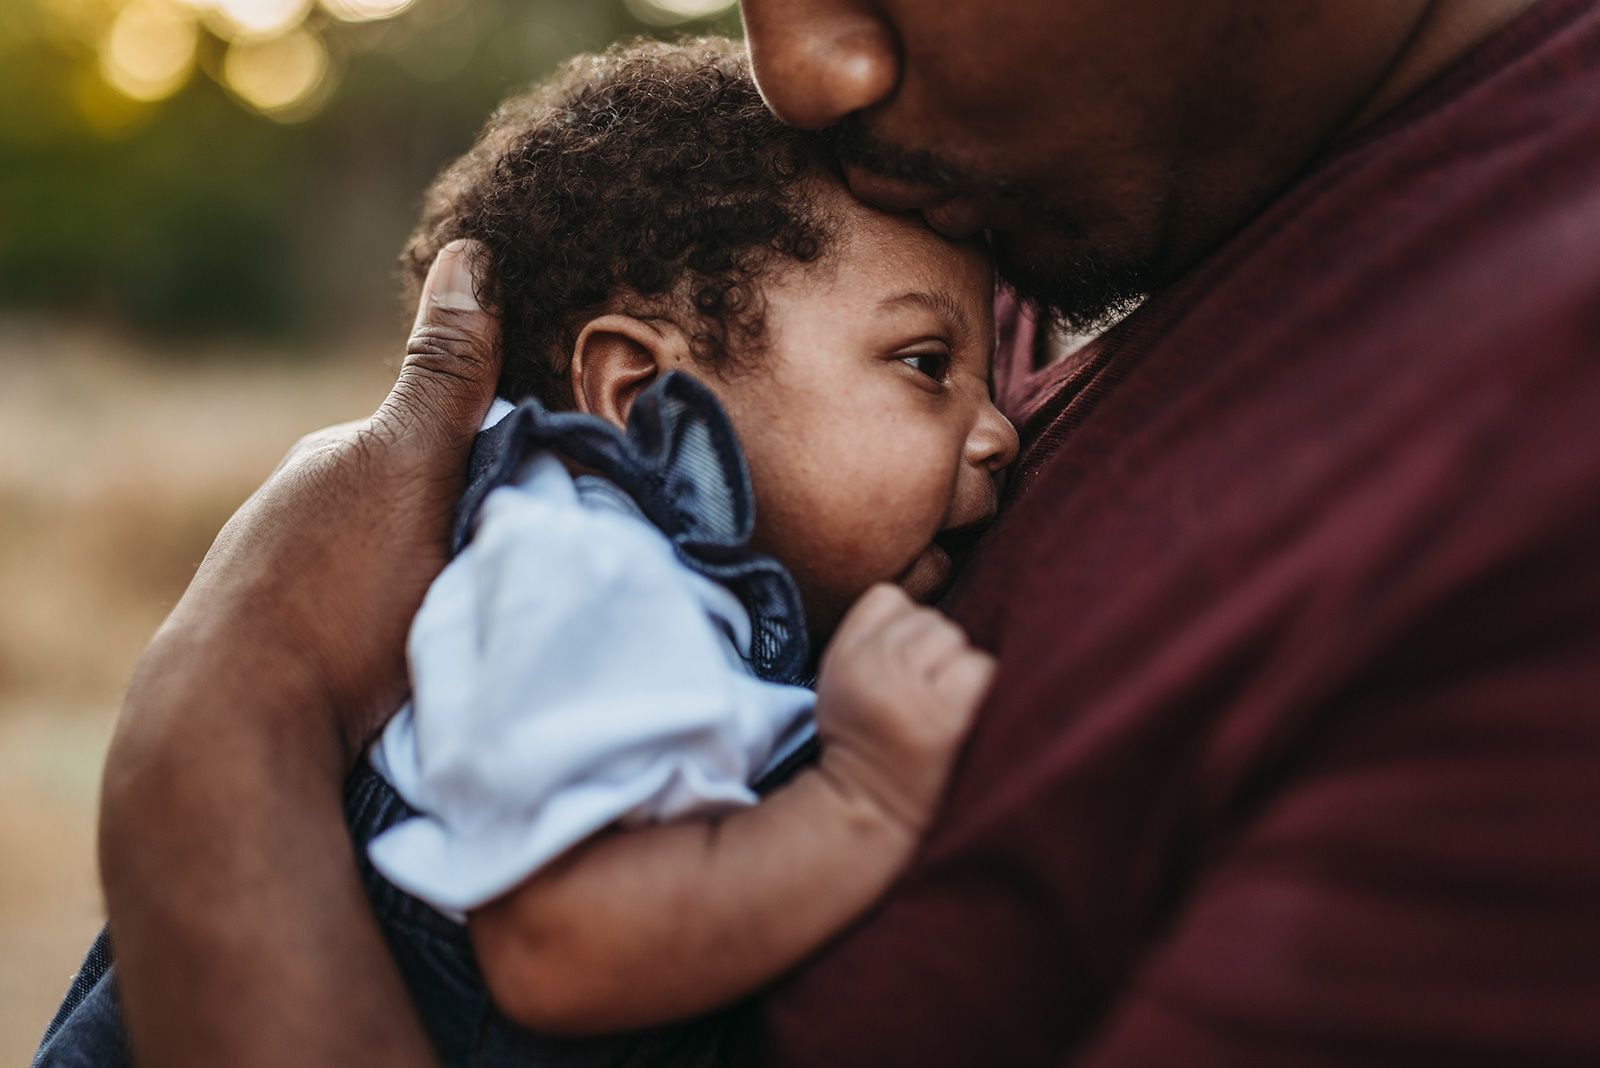 Fathers' role in breastfeeding and infant sleep is key, study finds | CNN